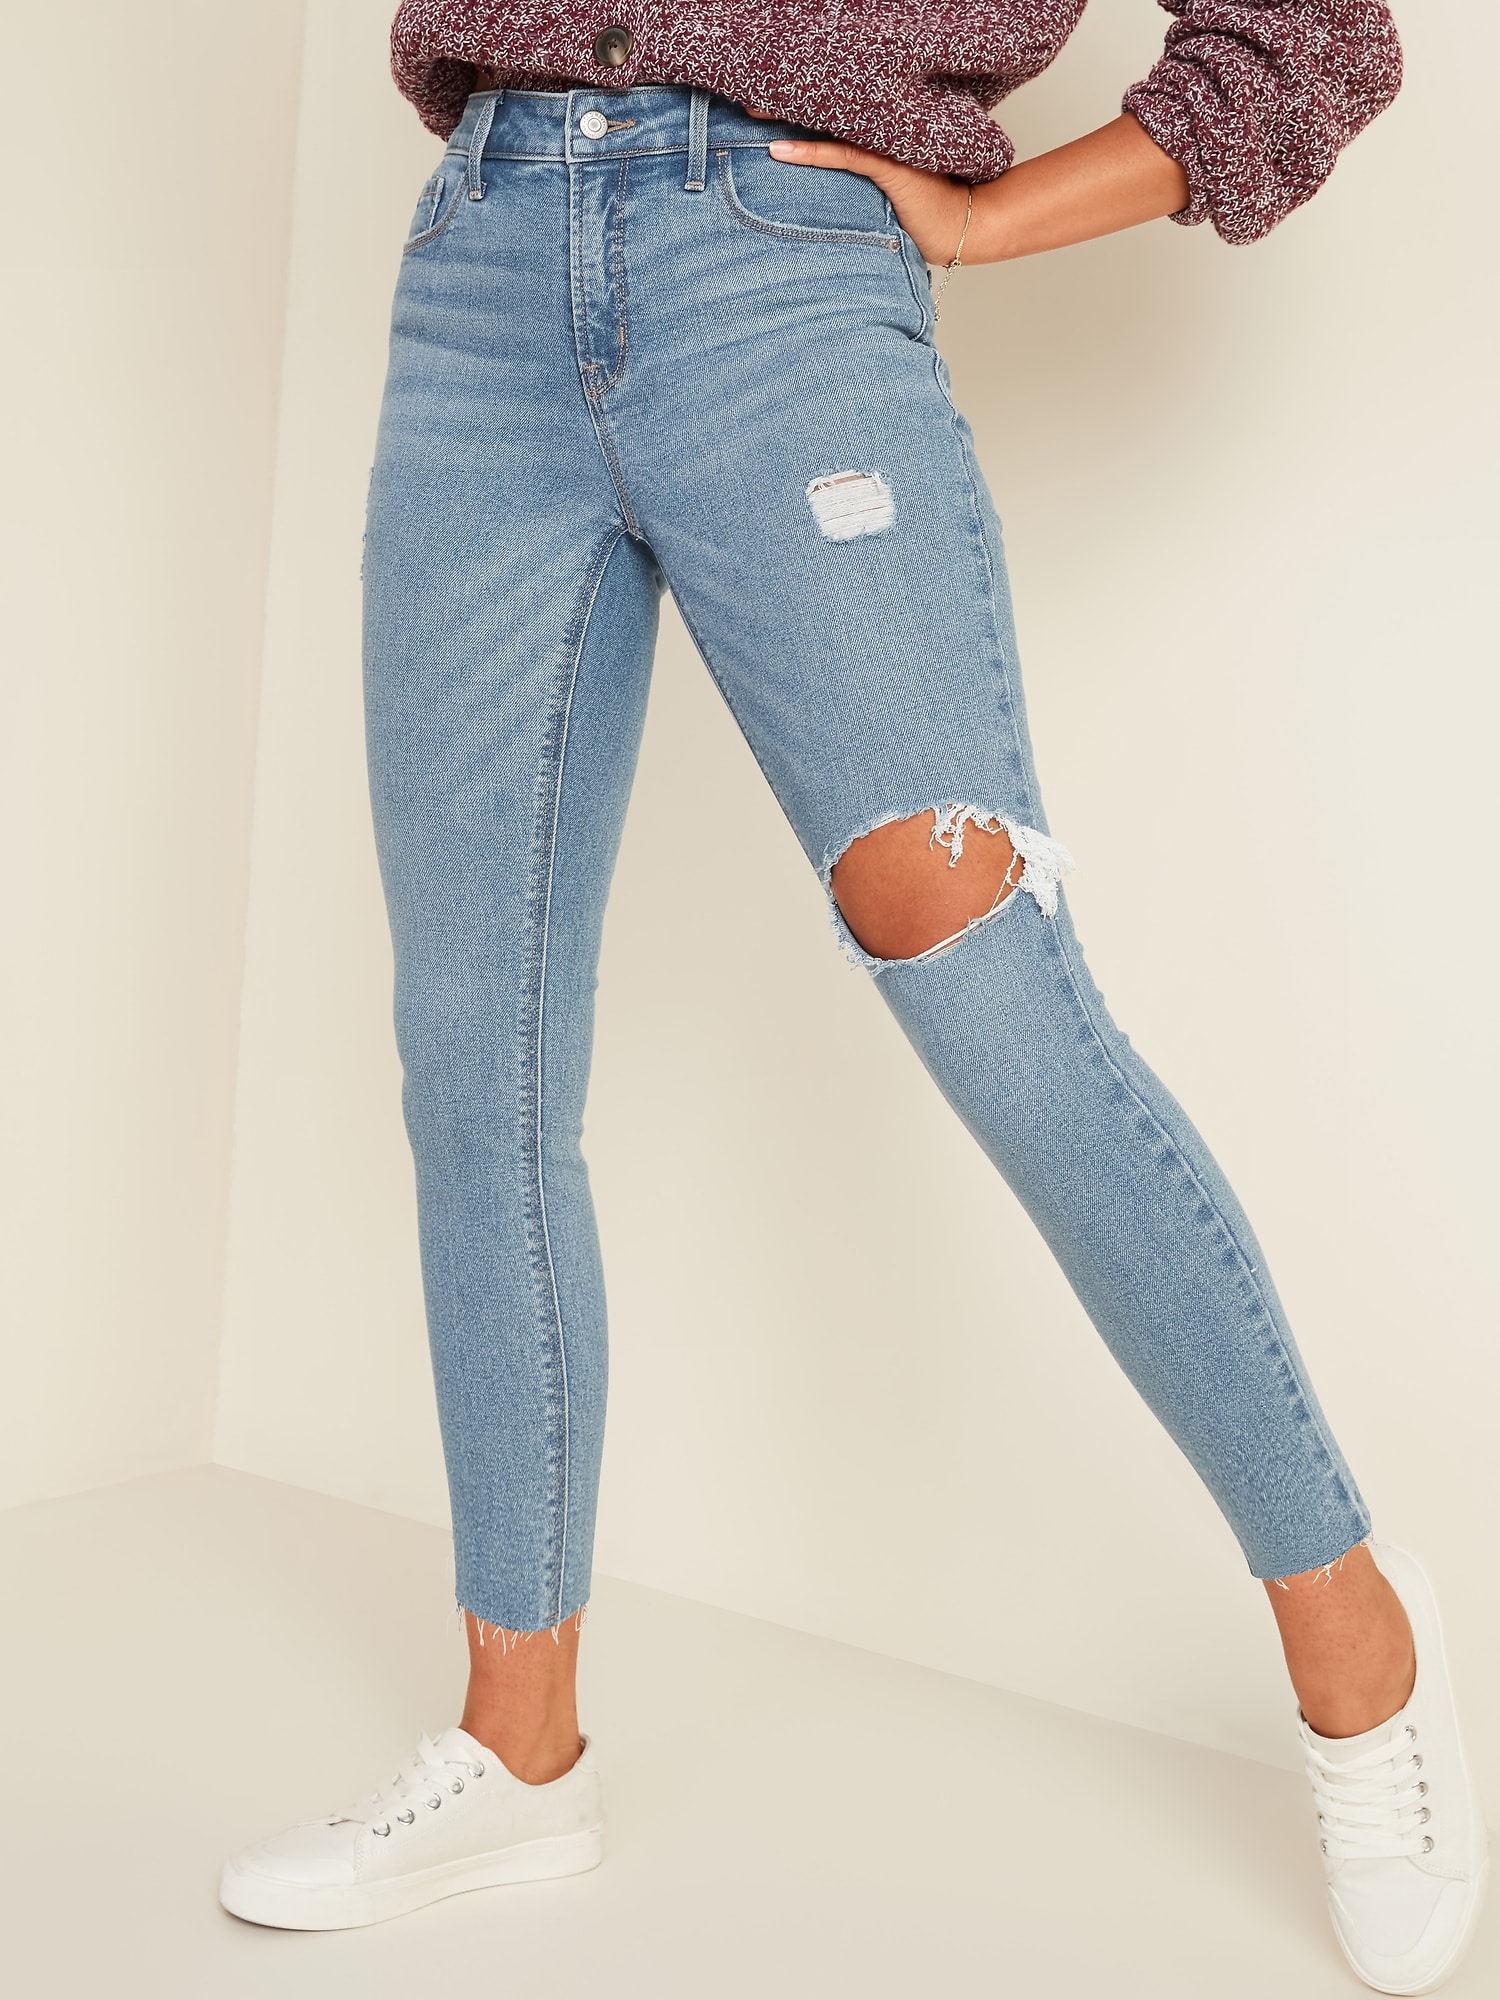 High-Waisted Rockstar Super Skinny Ripped Ankle Jeans for Women